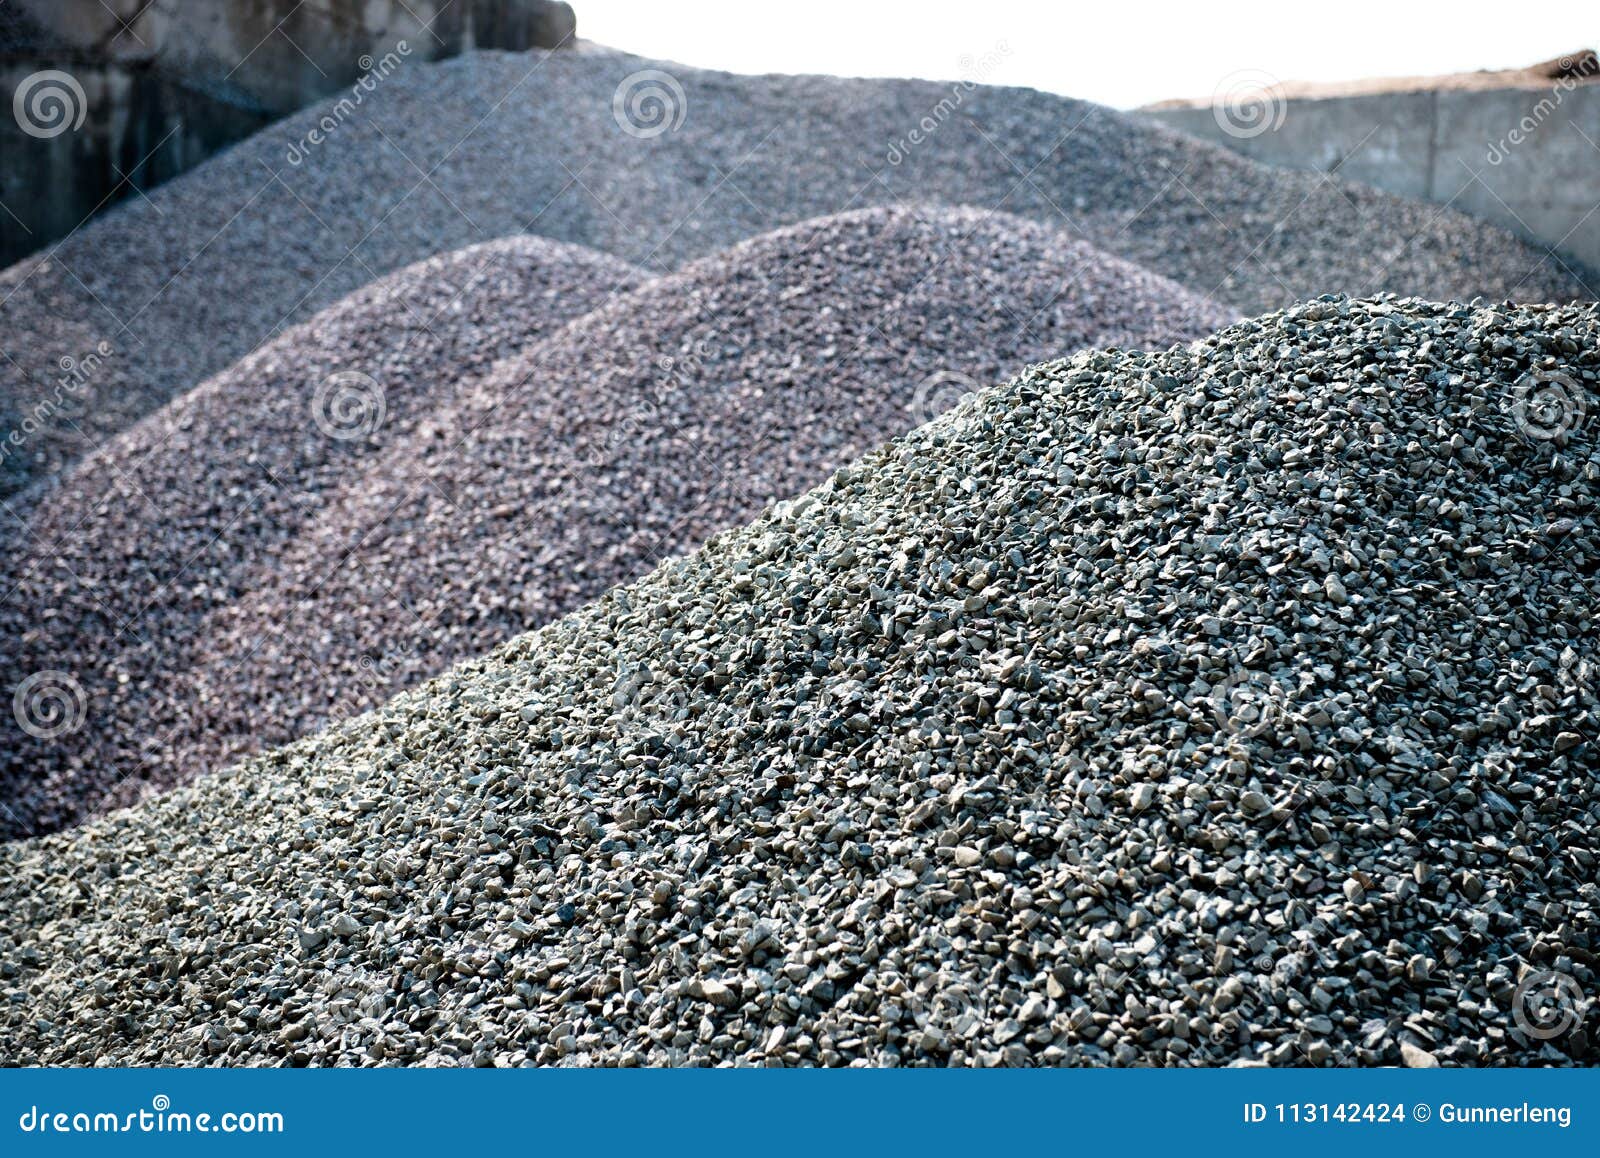 gravel gray stone textures asphalt mix concrete in road construction. pile rock and stone for industrial